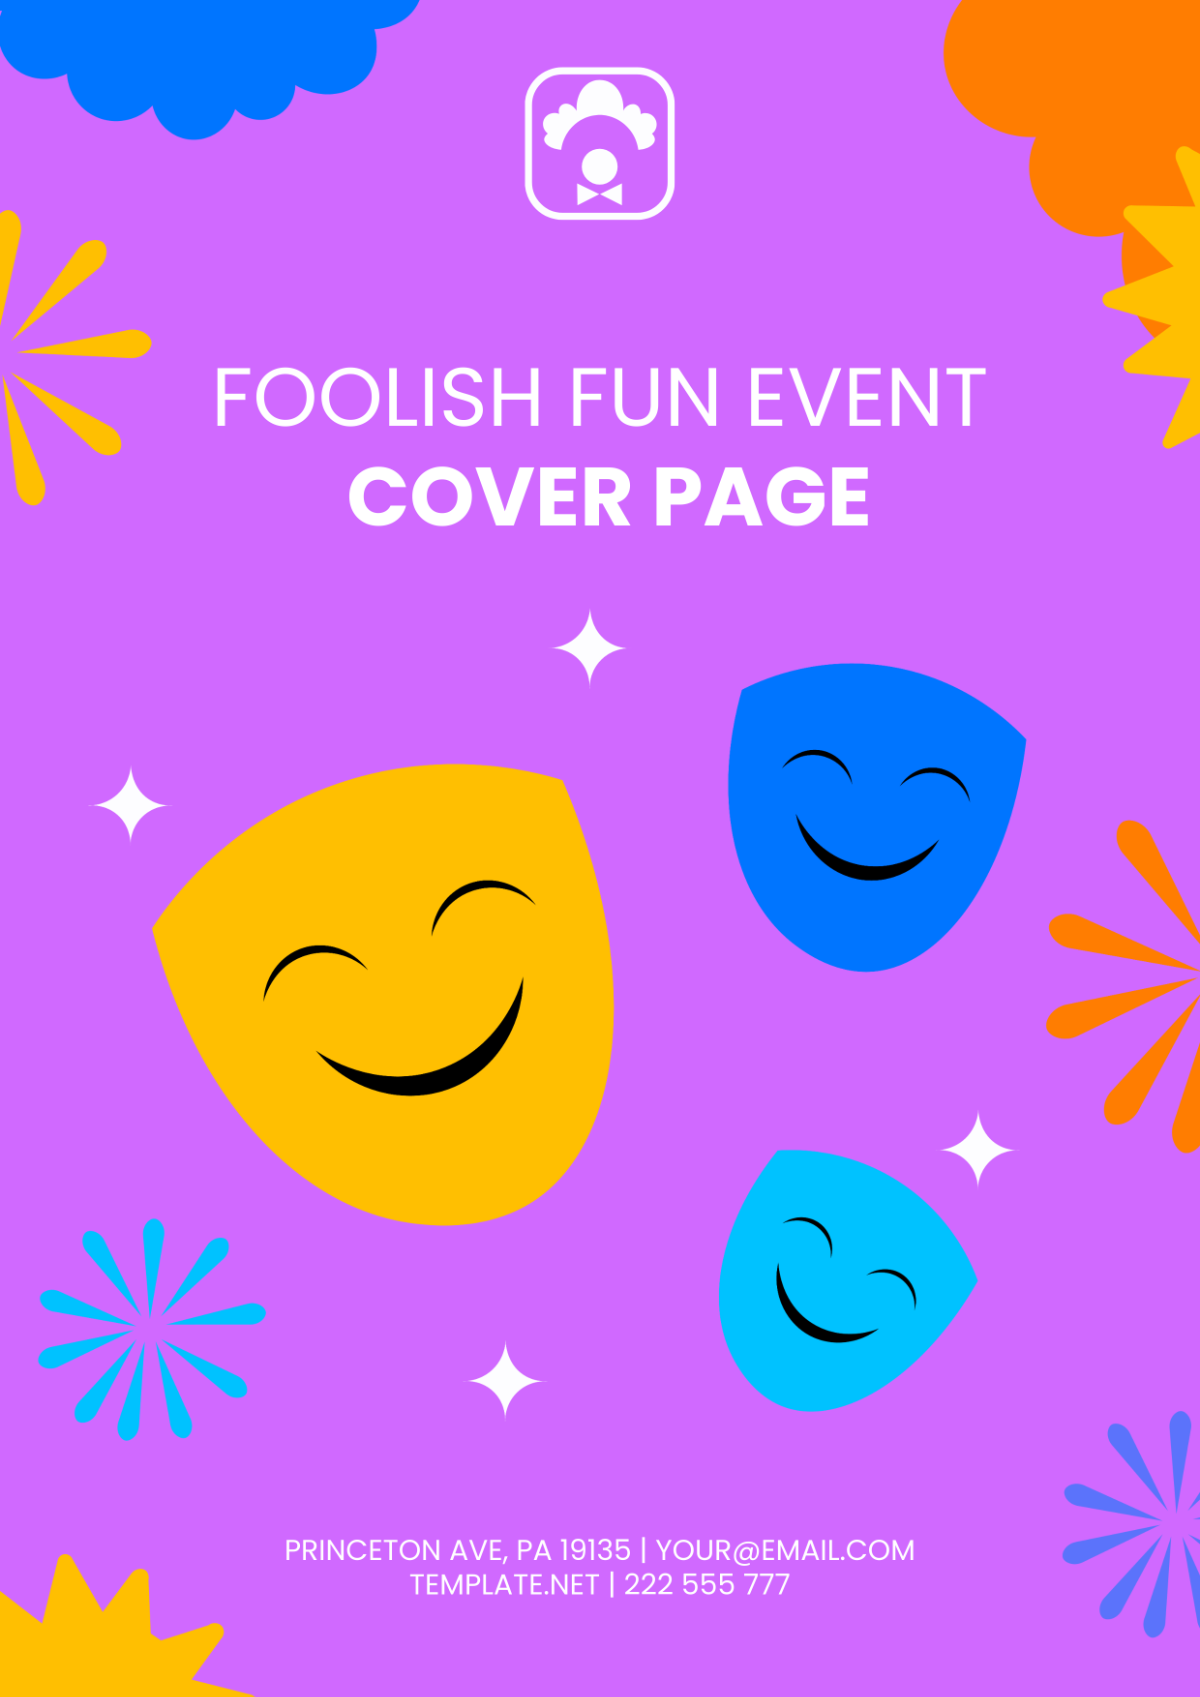 Foolish Fun Event Cover Page Template